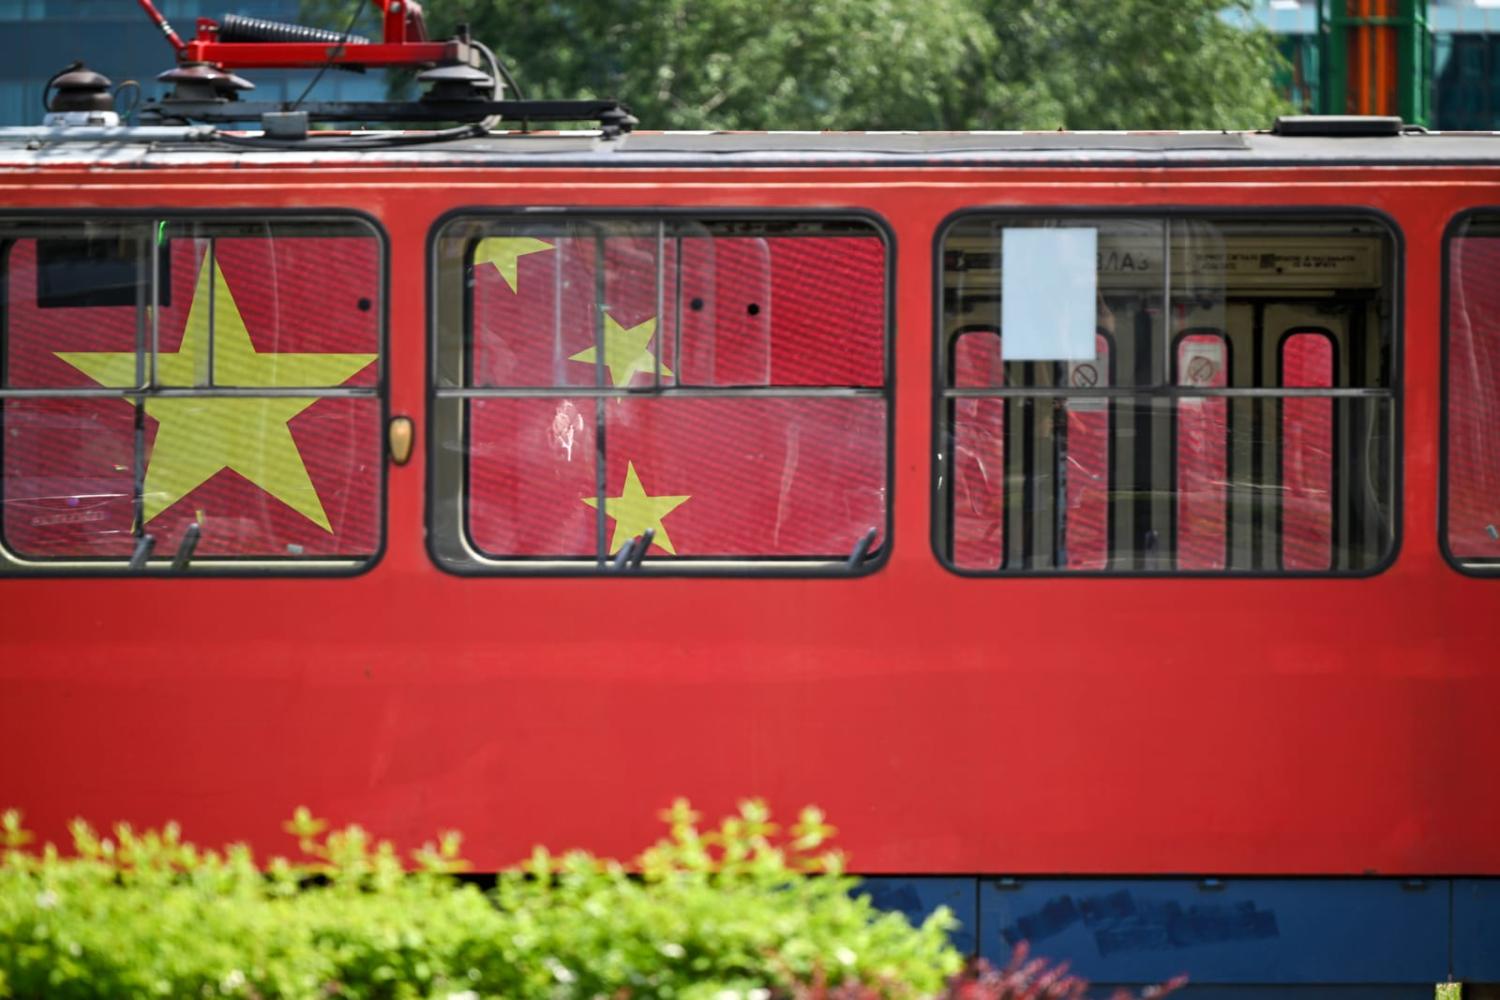 The national flag of China on a billboard ahead of the state visit of China's President Xi Jinping, in Belgrade, Serbia (Oliver Bunic/Bloomberg via Getty Images)